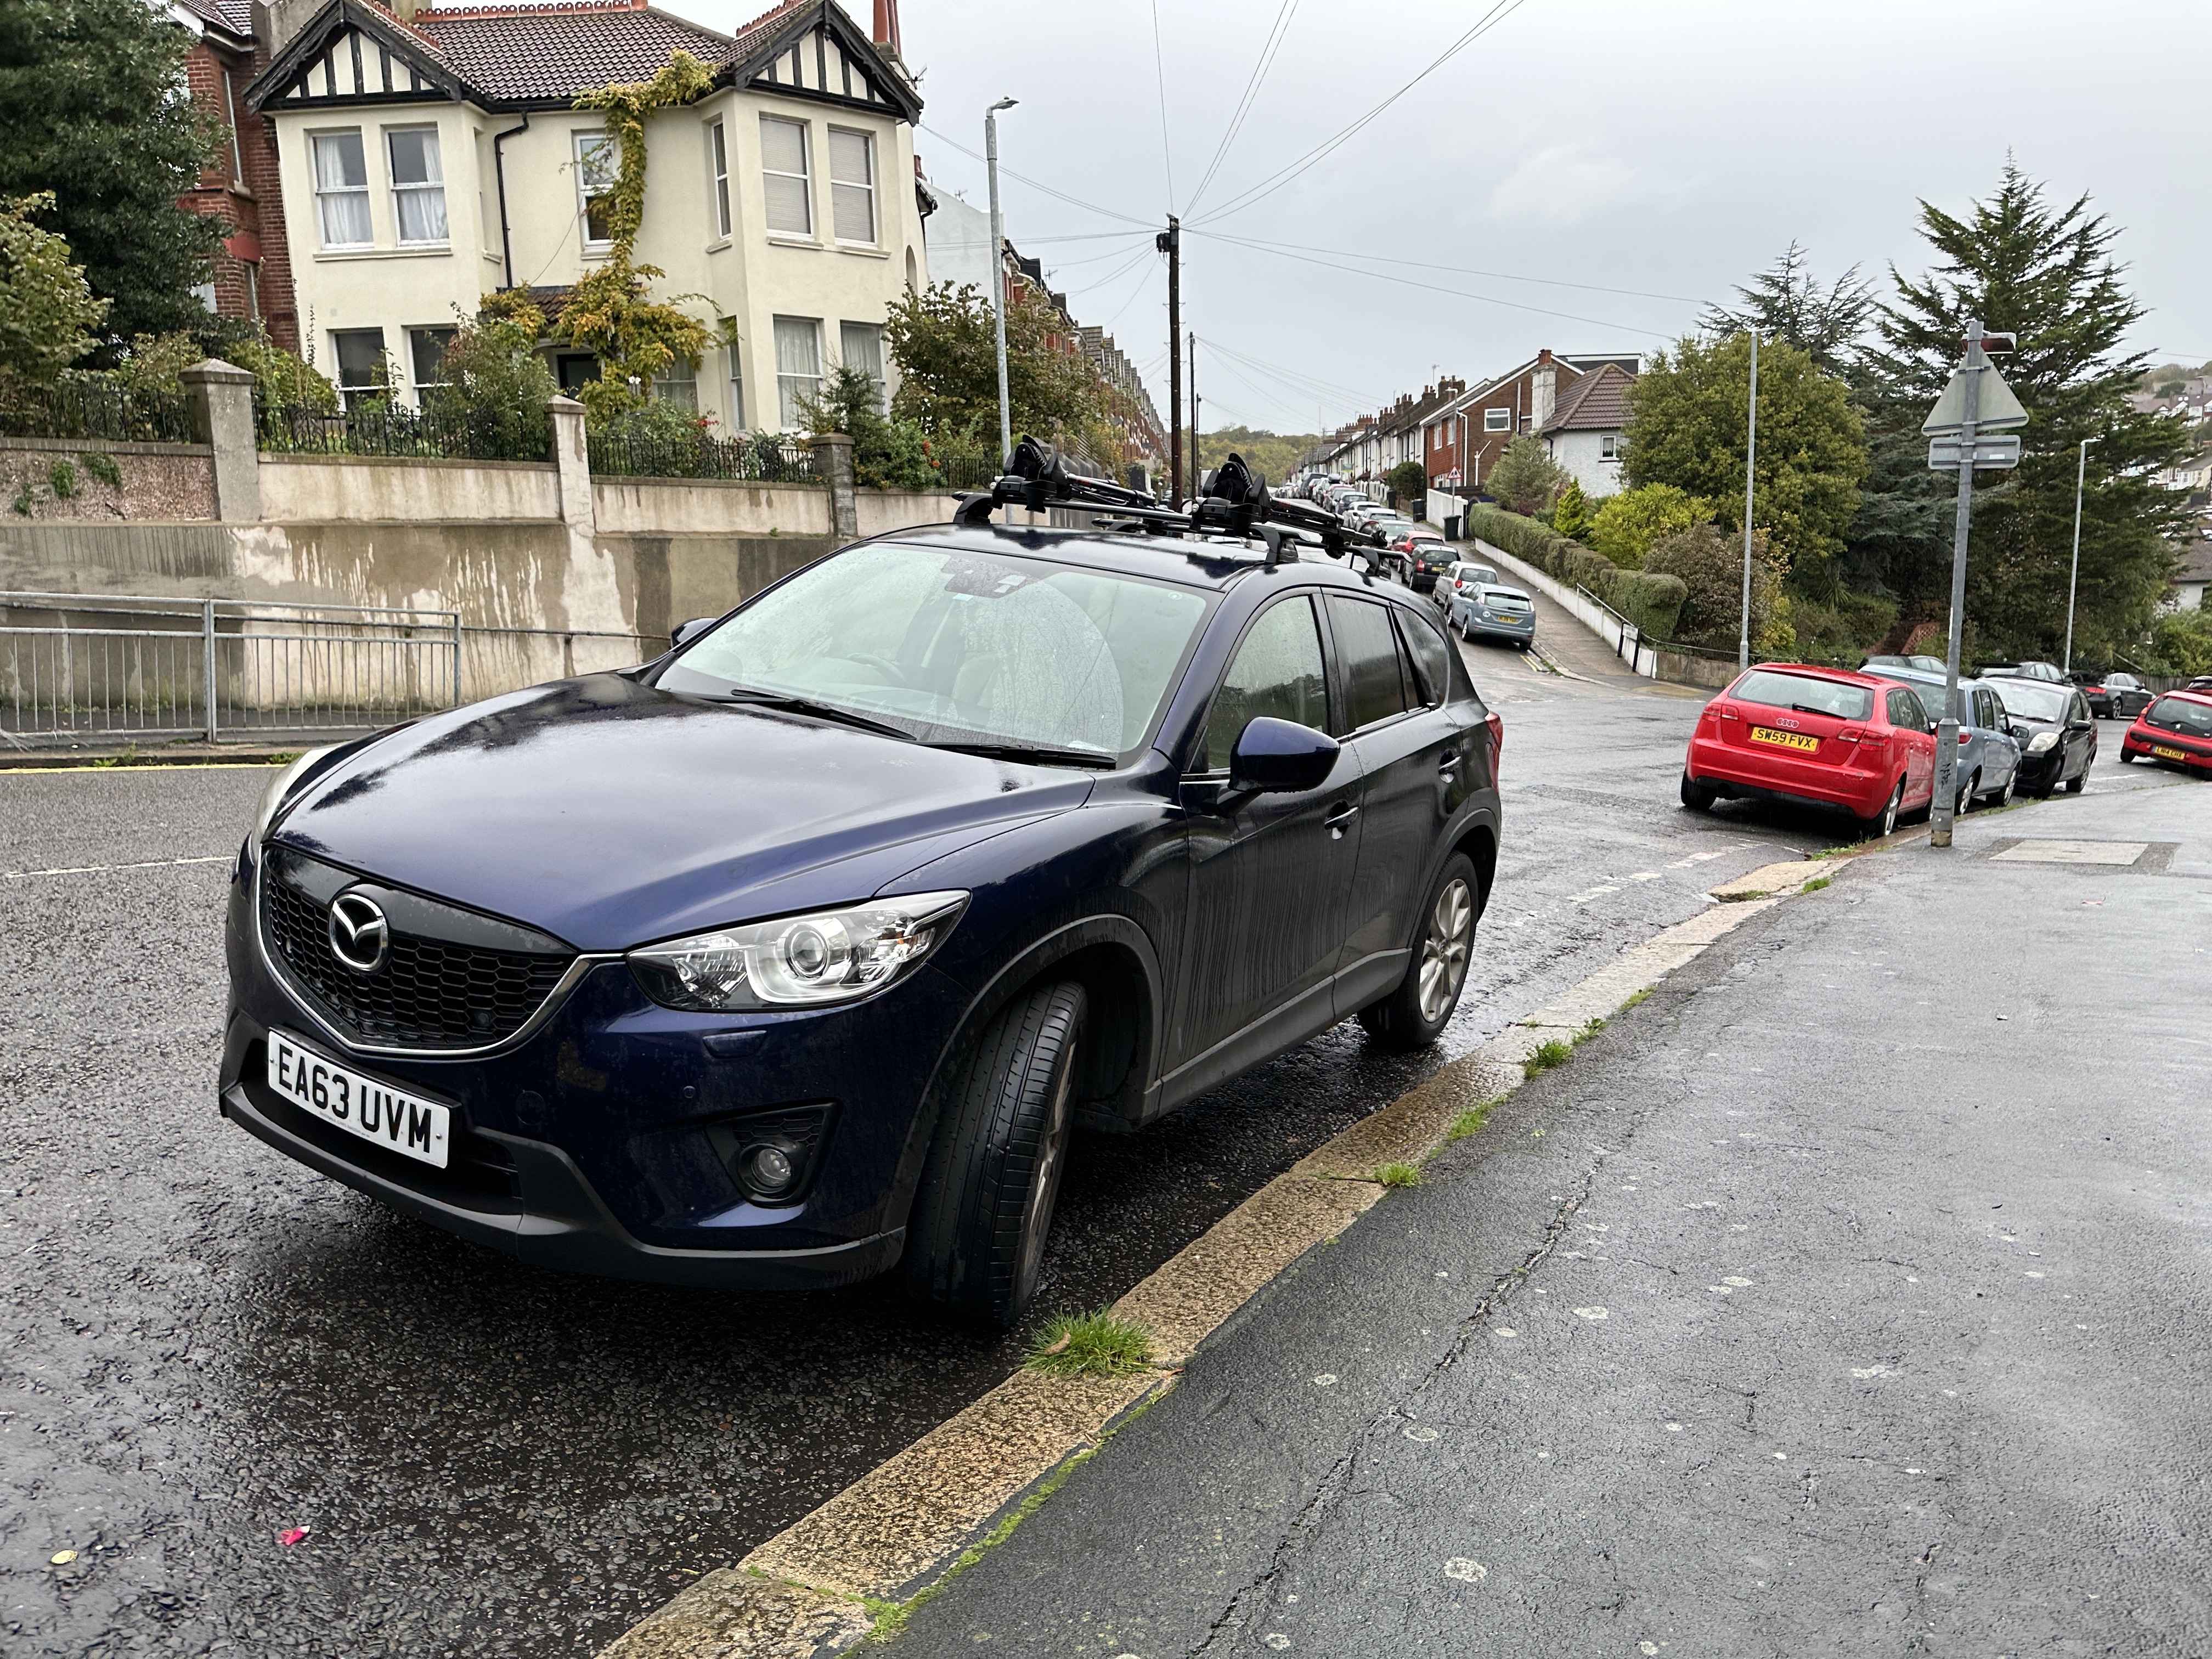 Photograph of EA63 UVM - a Blue Mazda CX-5 parked in Hollingdean by a non-resident. The first of two photographs supplied by the residents of Hollingdean.